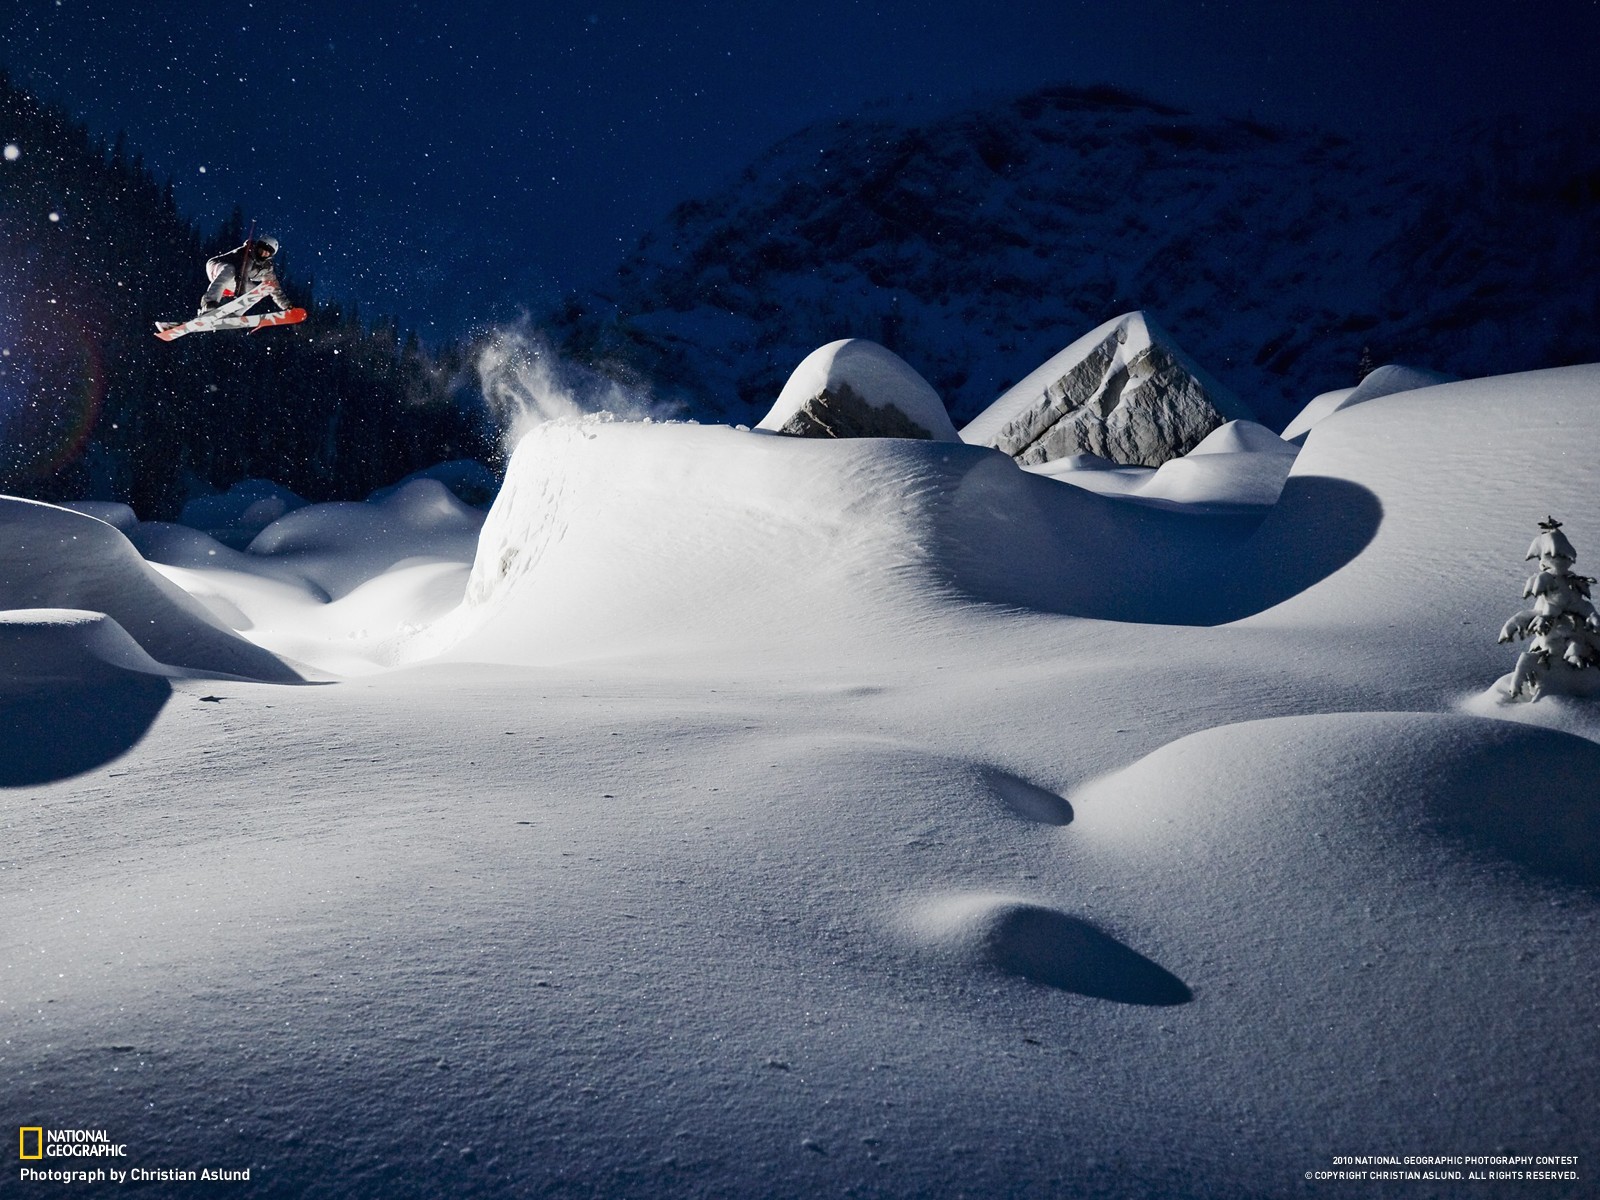 General 1600x1200 snow nature sport winter night National Geographic 2010 (Year)